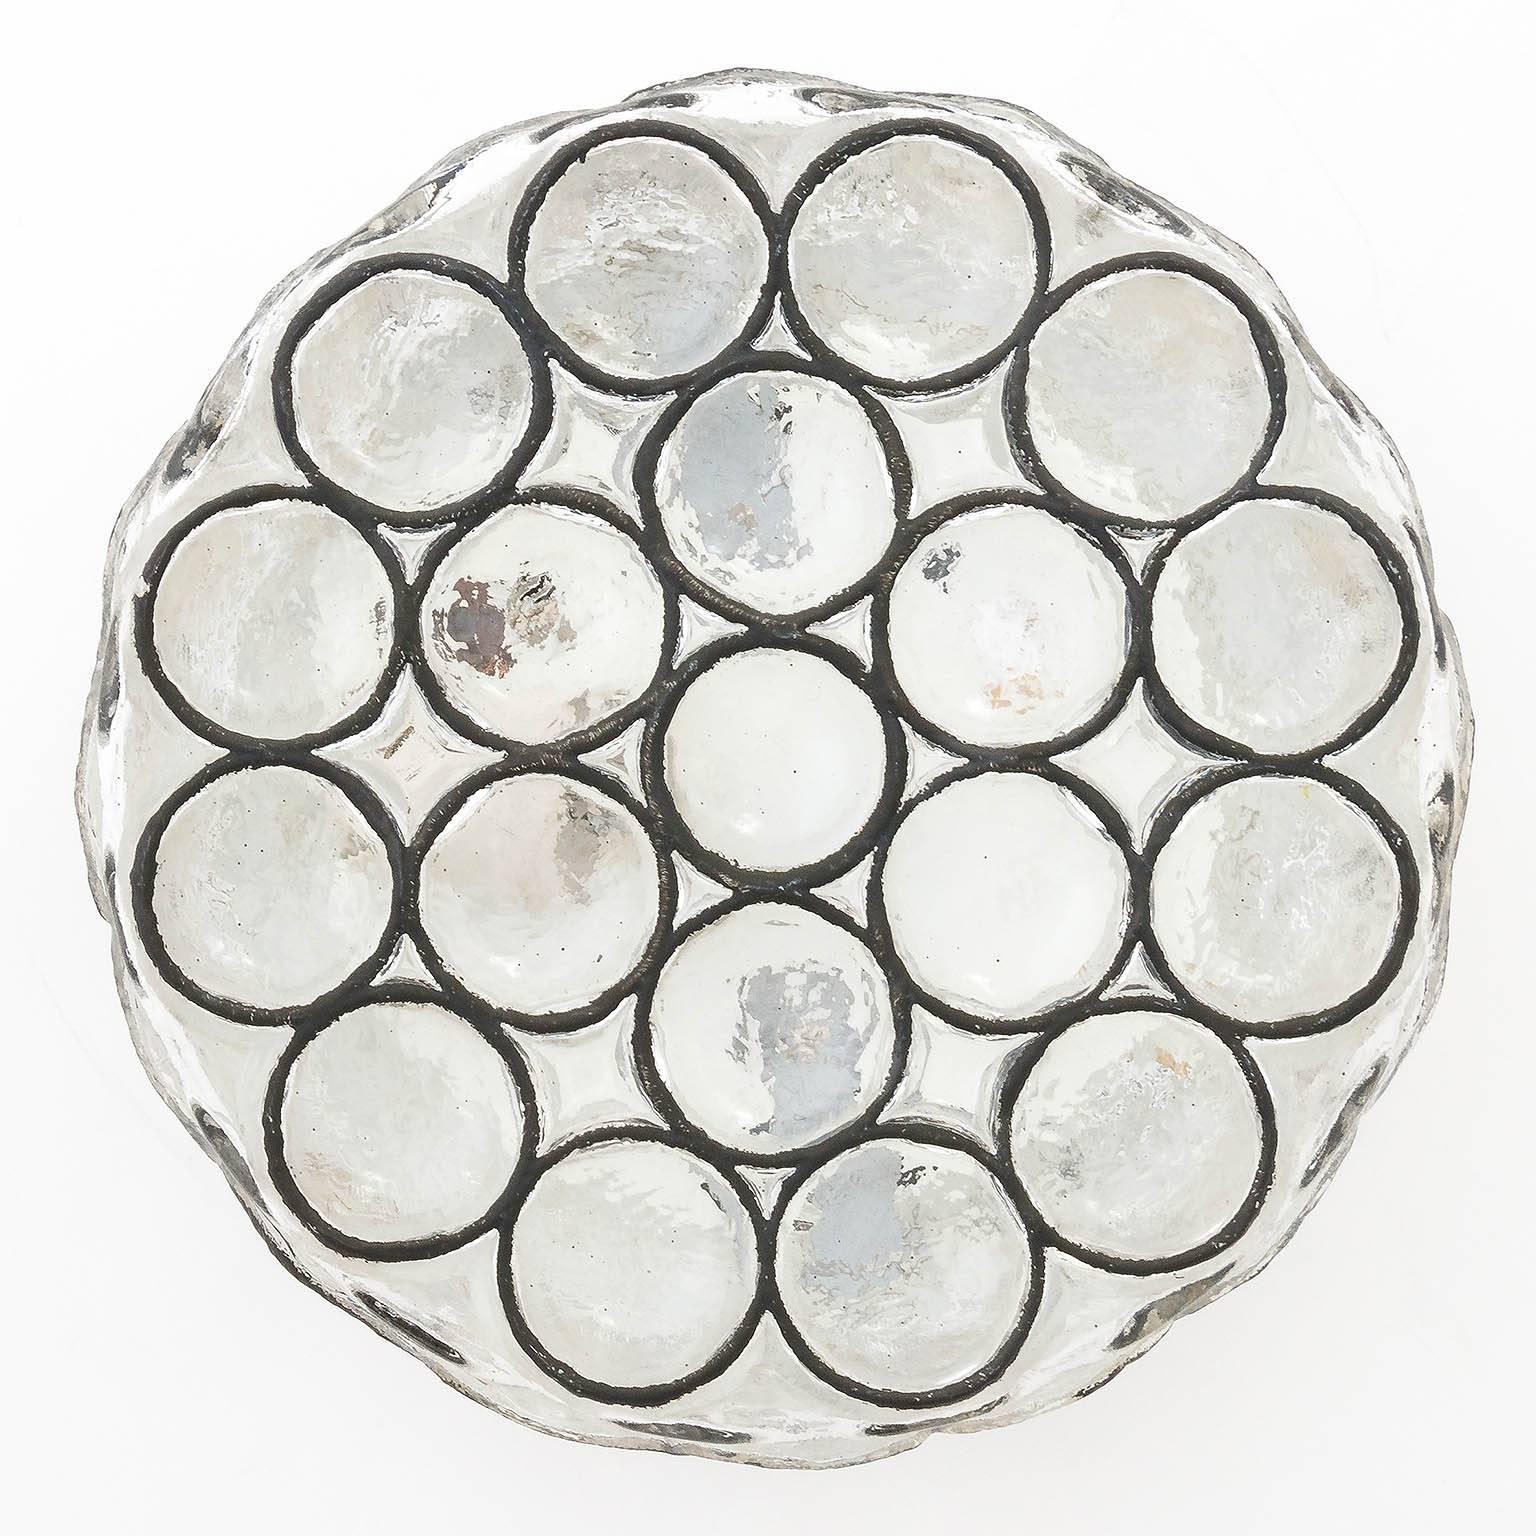 Beautiful and unique design 'iron' glass light fixture by Glashütte Limburg, Germany, manufactured in Mid-Century (1960s / 1970s). Can be used as wall or ceiling lamp. Black iron circles inlaid in thick clear glass. Labeled.
One medium base bulb